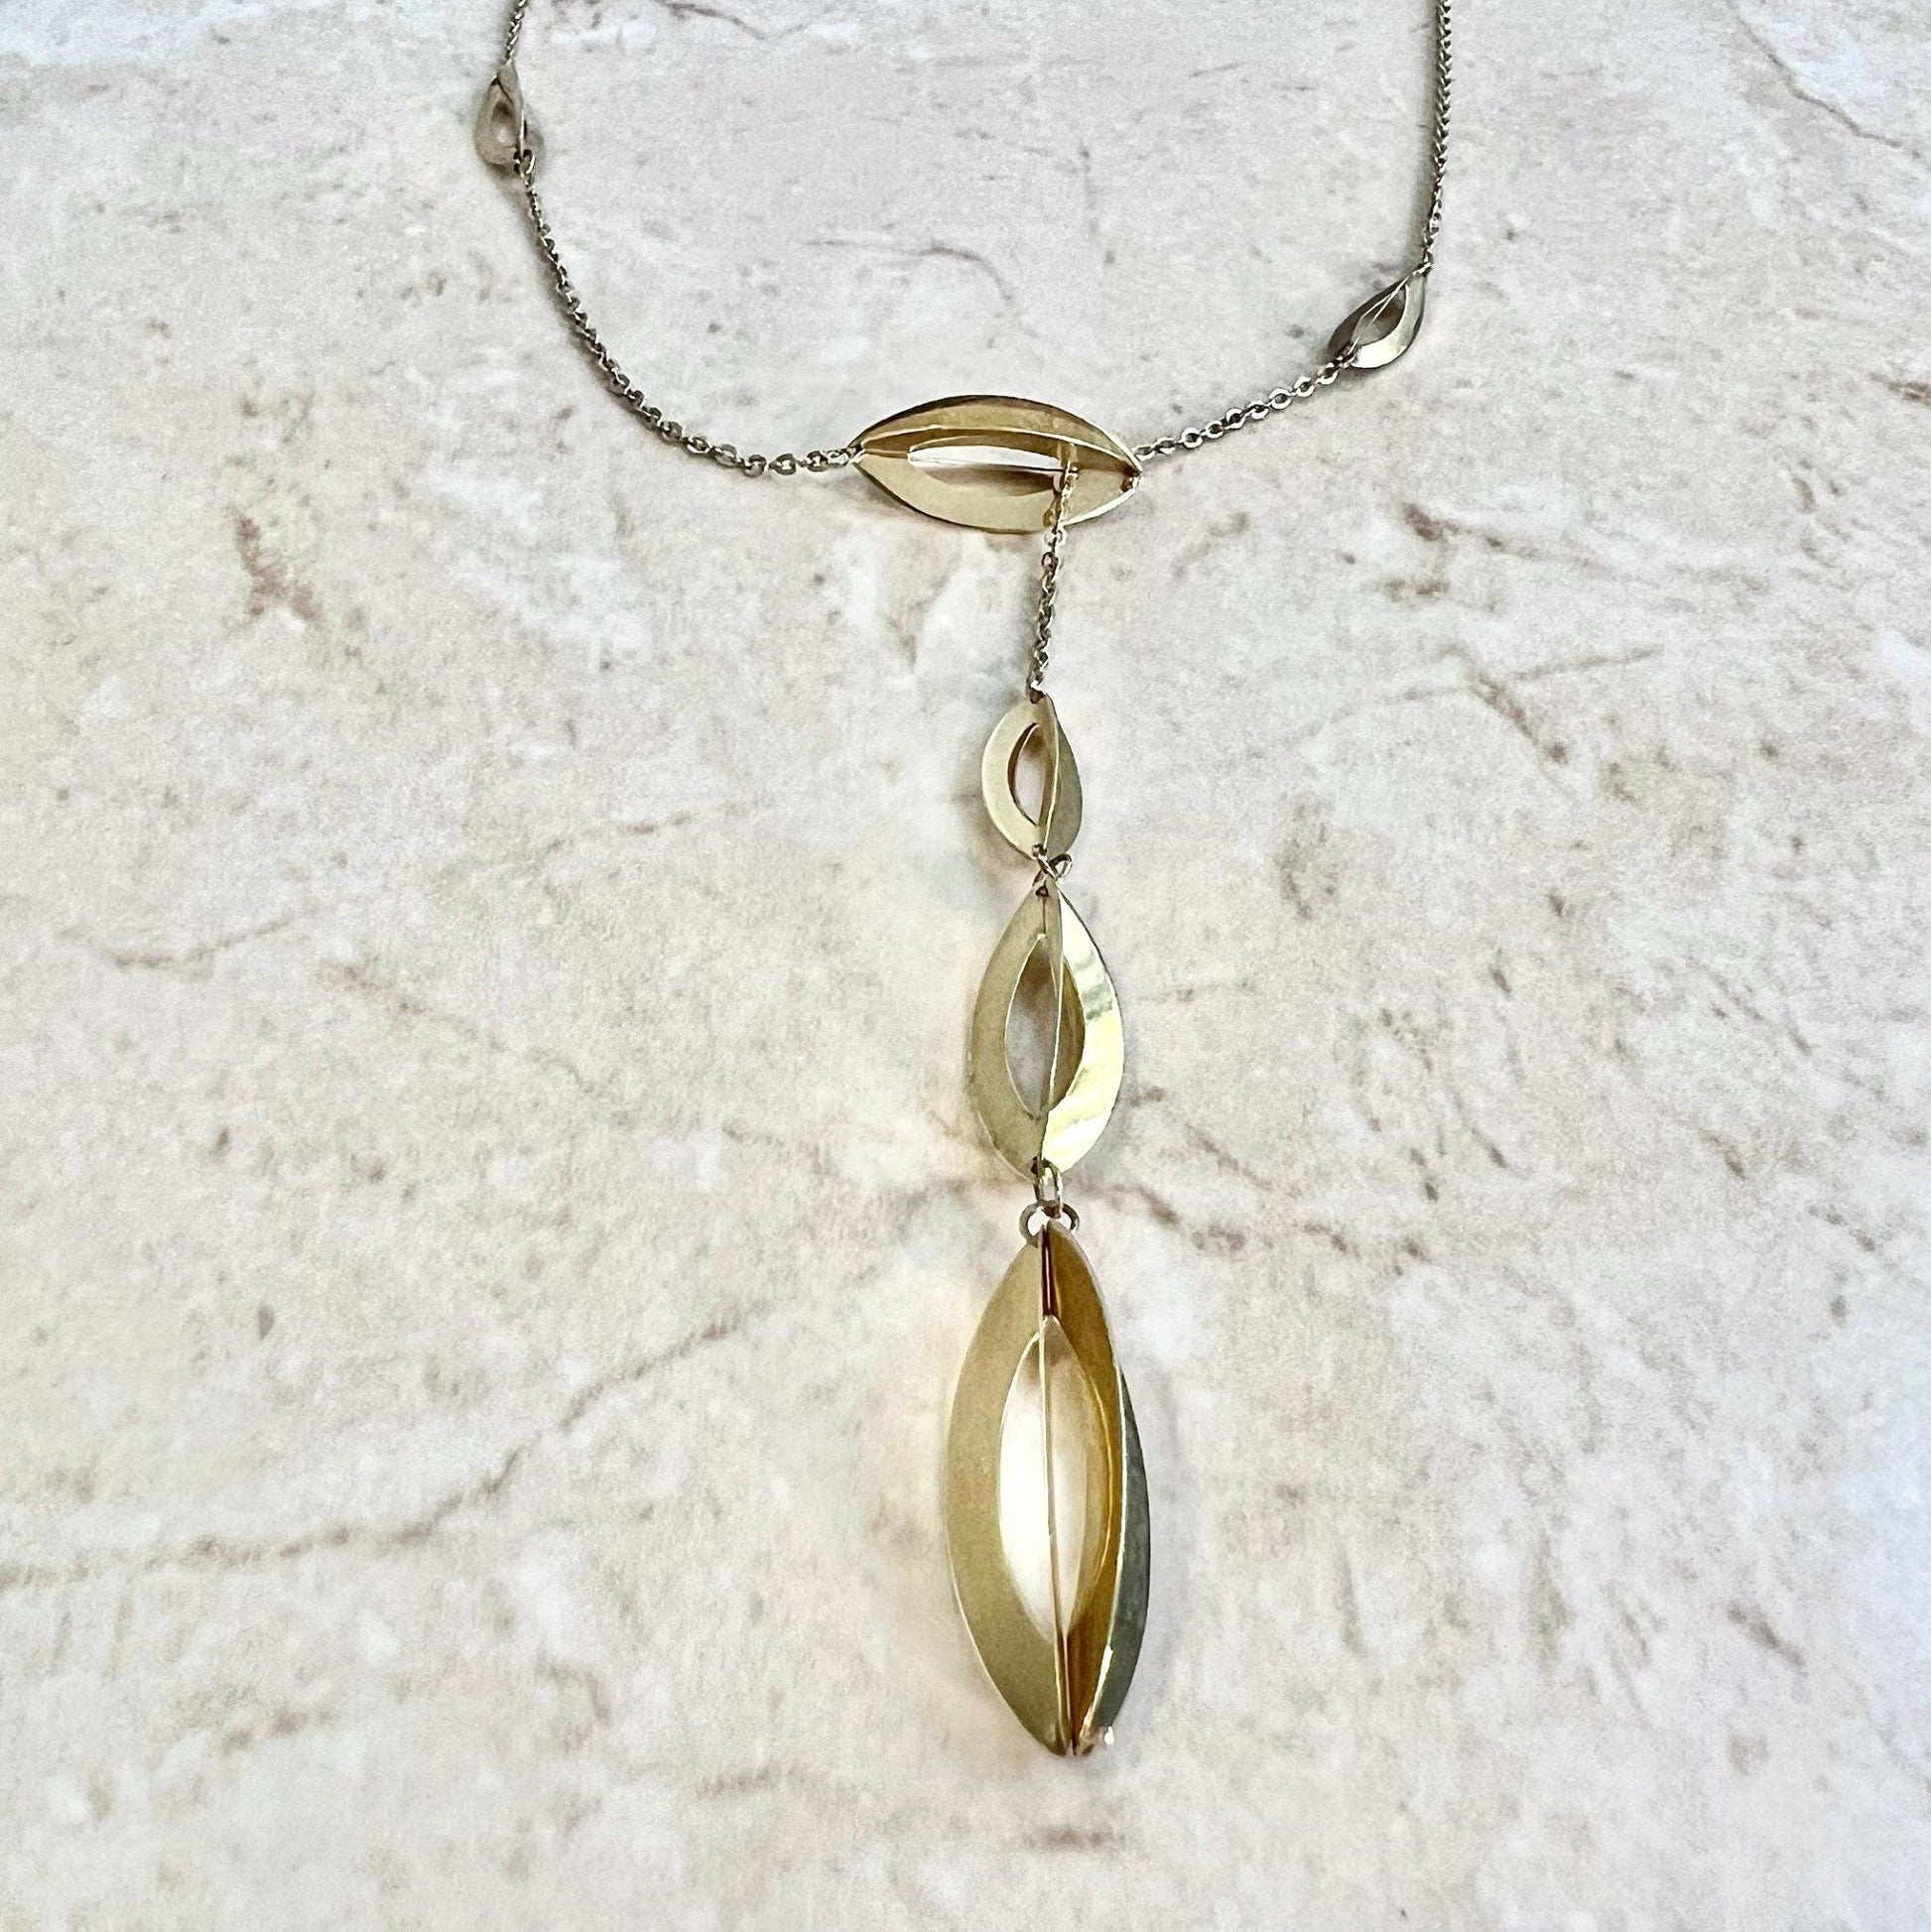 Vintage 14K Yellow Gold Lariat Necklace - Yellow Gold Necklace - Solid Gold Necklace - Gifts For Her - Mother’s Day Gifts - Gifts For Mom